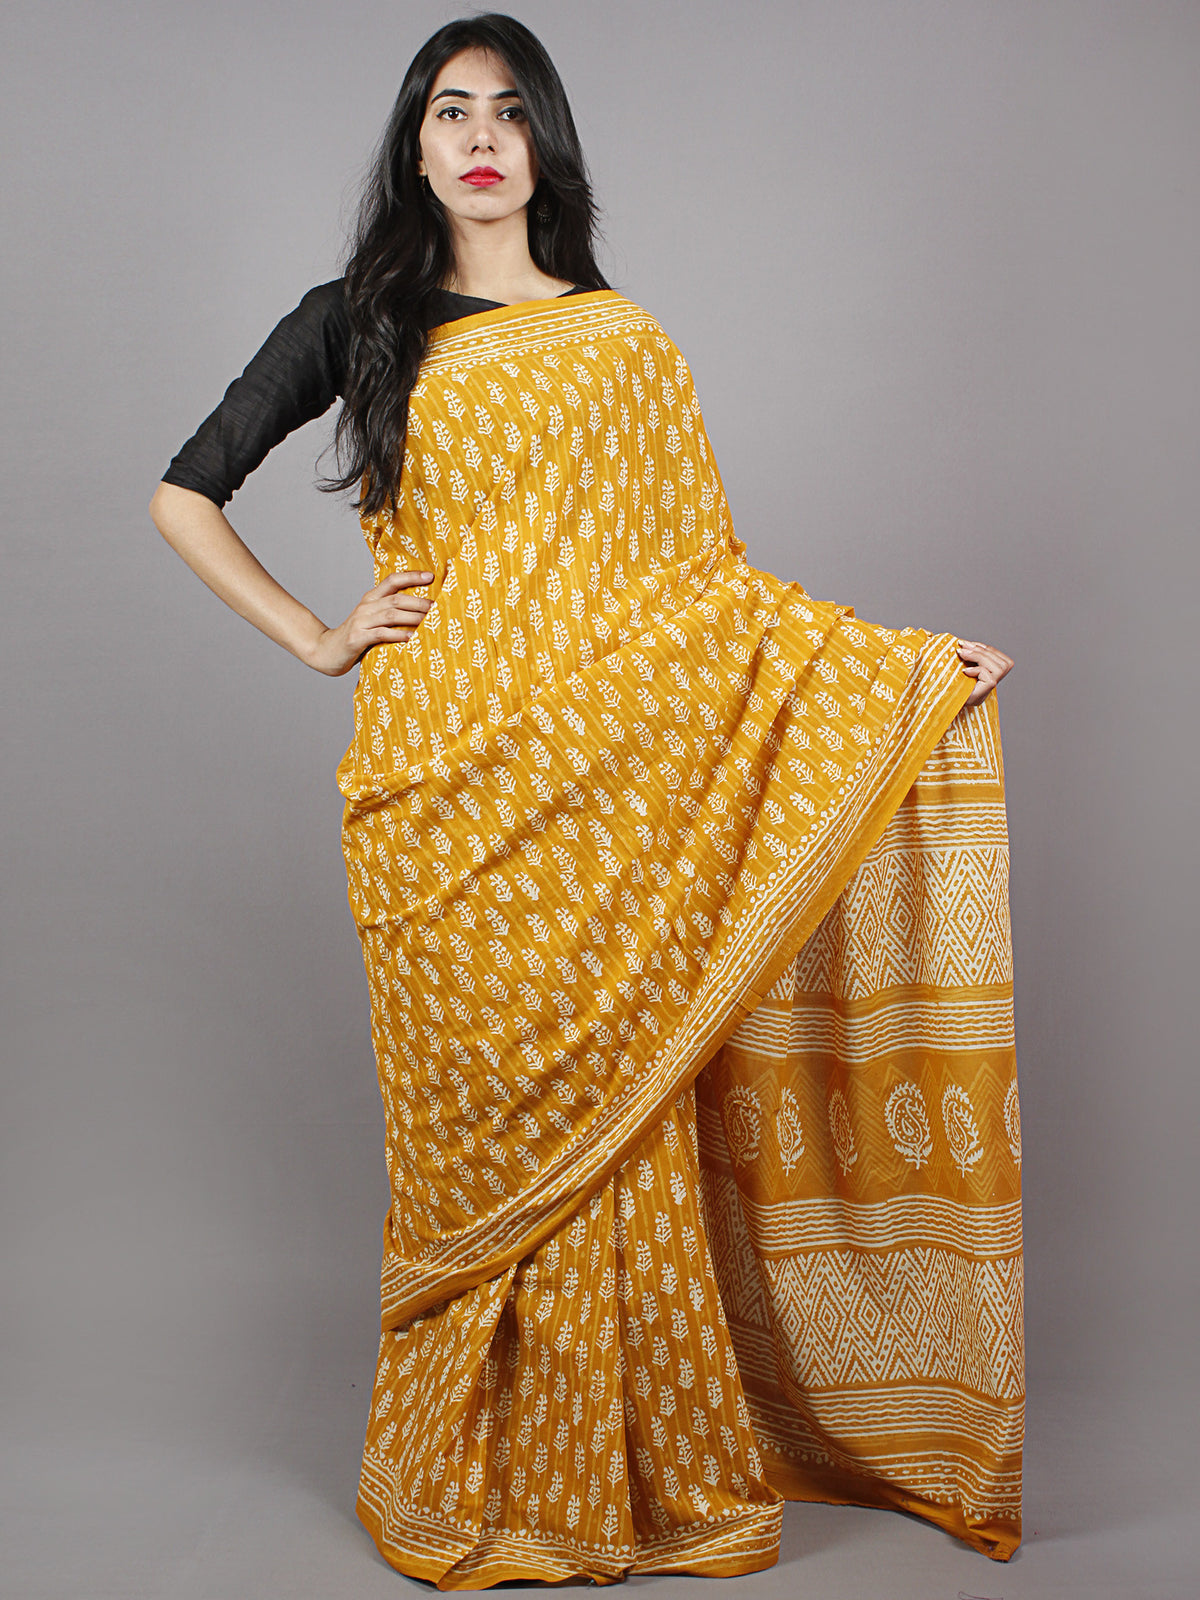 Mustard Yellow Ivory Hand Block Printed in Natural Colors Cotton Mul Saree - S031701233